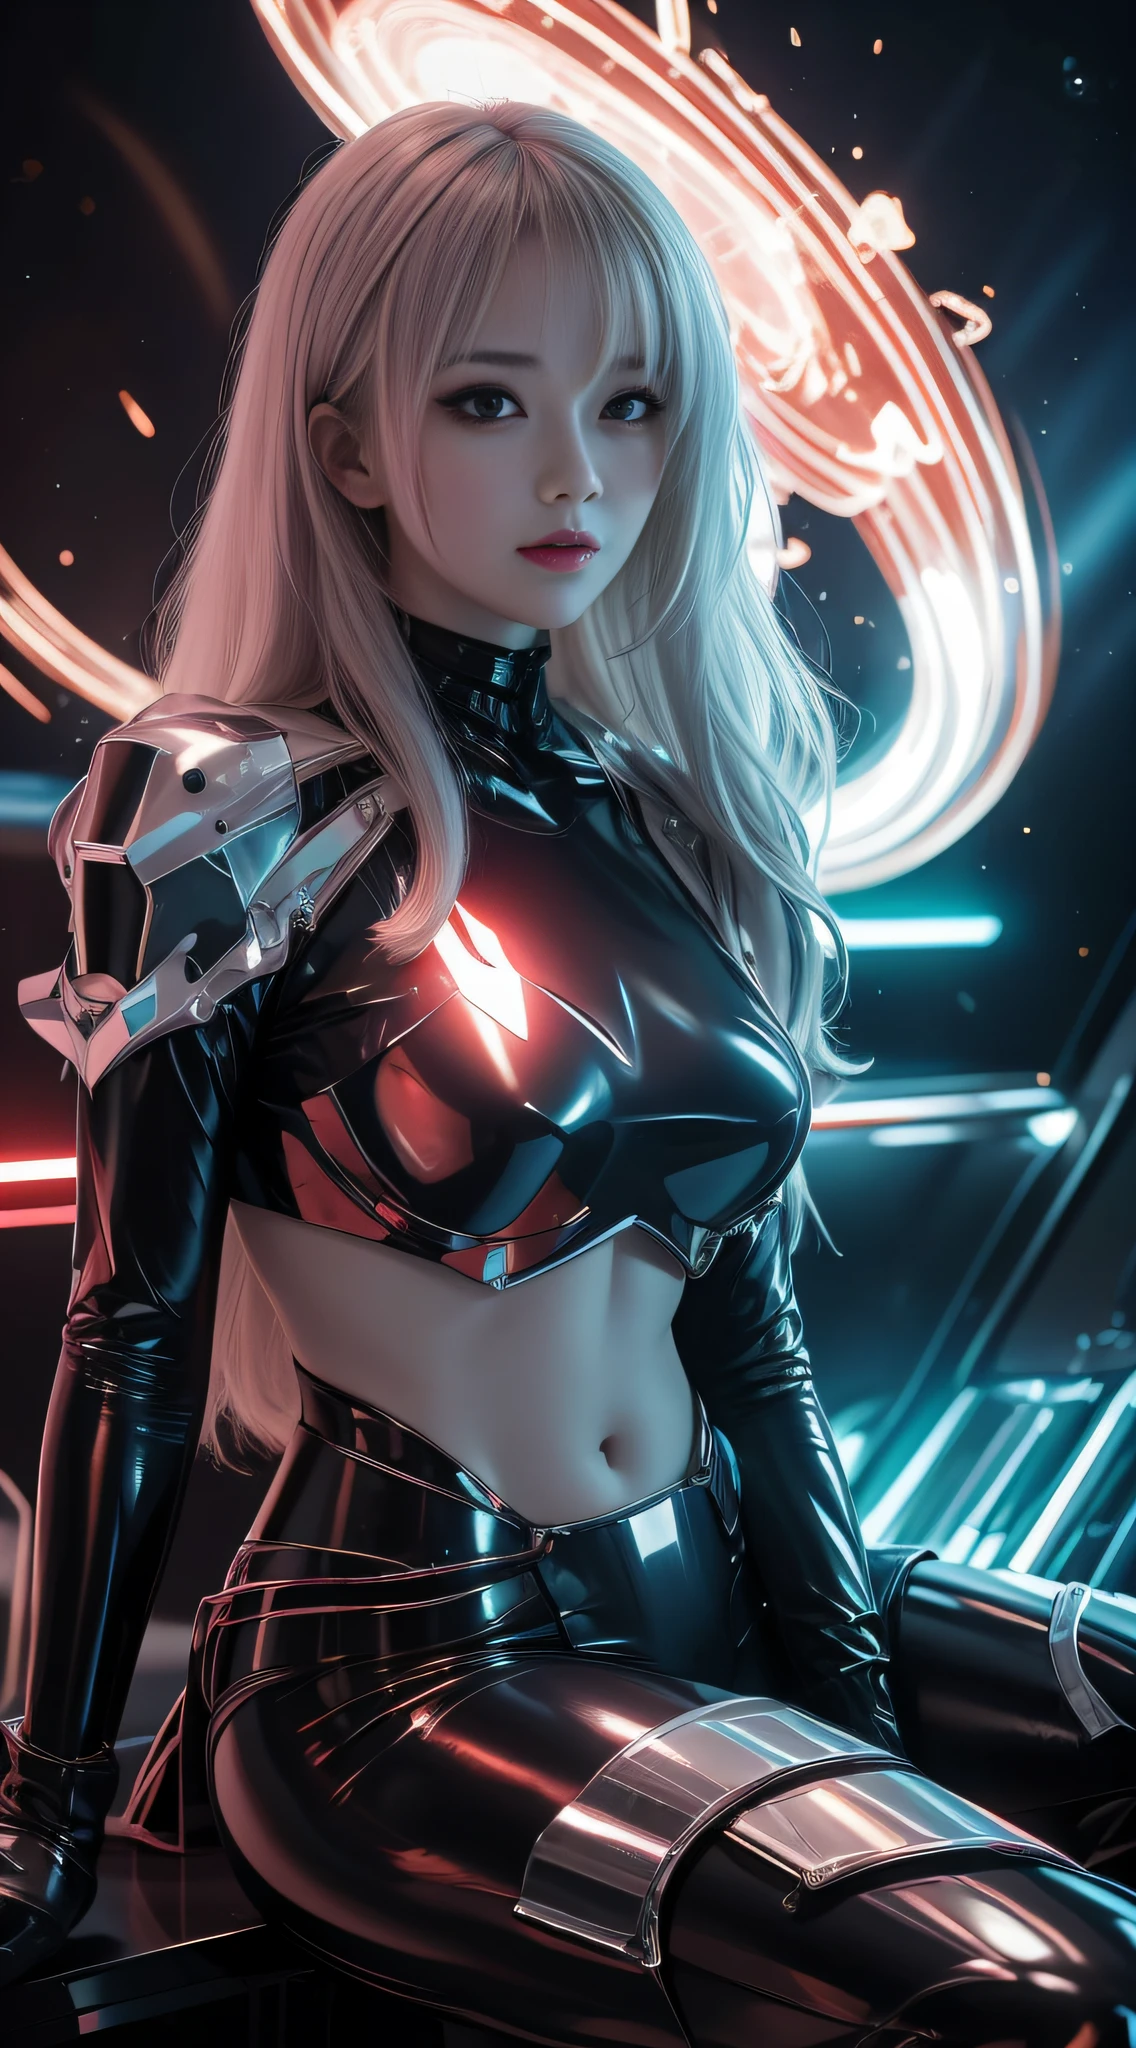 8K  UHD, materpiece, A beautiful girl, A detailed eye, Good face, Fine eyebrows, Cyberpunk costumes, Lightning costume, Cyberpunk, Cyberspace, Cyberpunk shiny colored background, neon-light-effect, Extended lighting, red lighting, Sitting, Body capture,